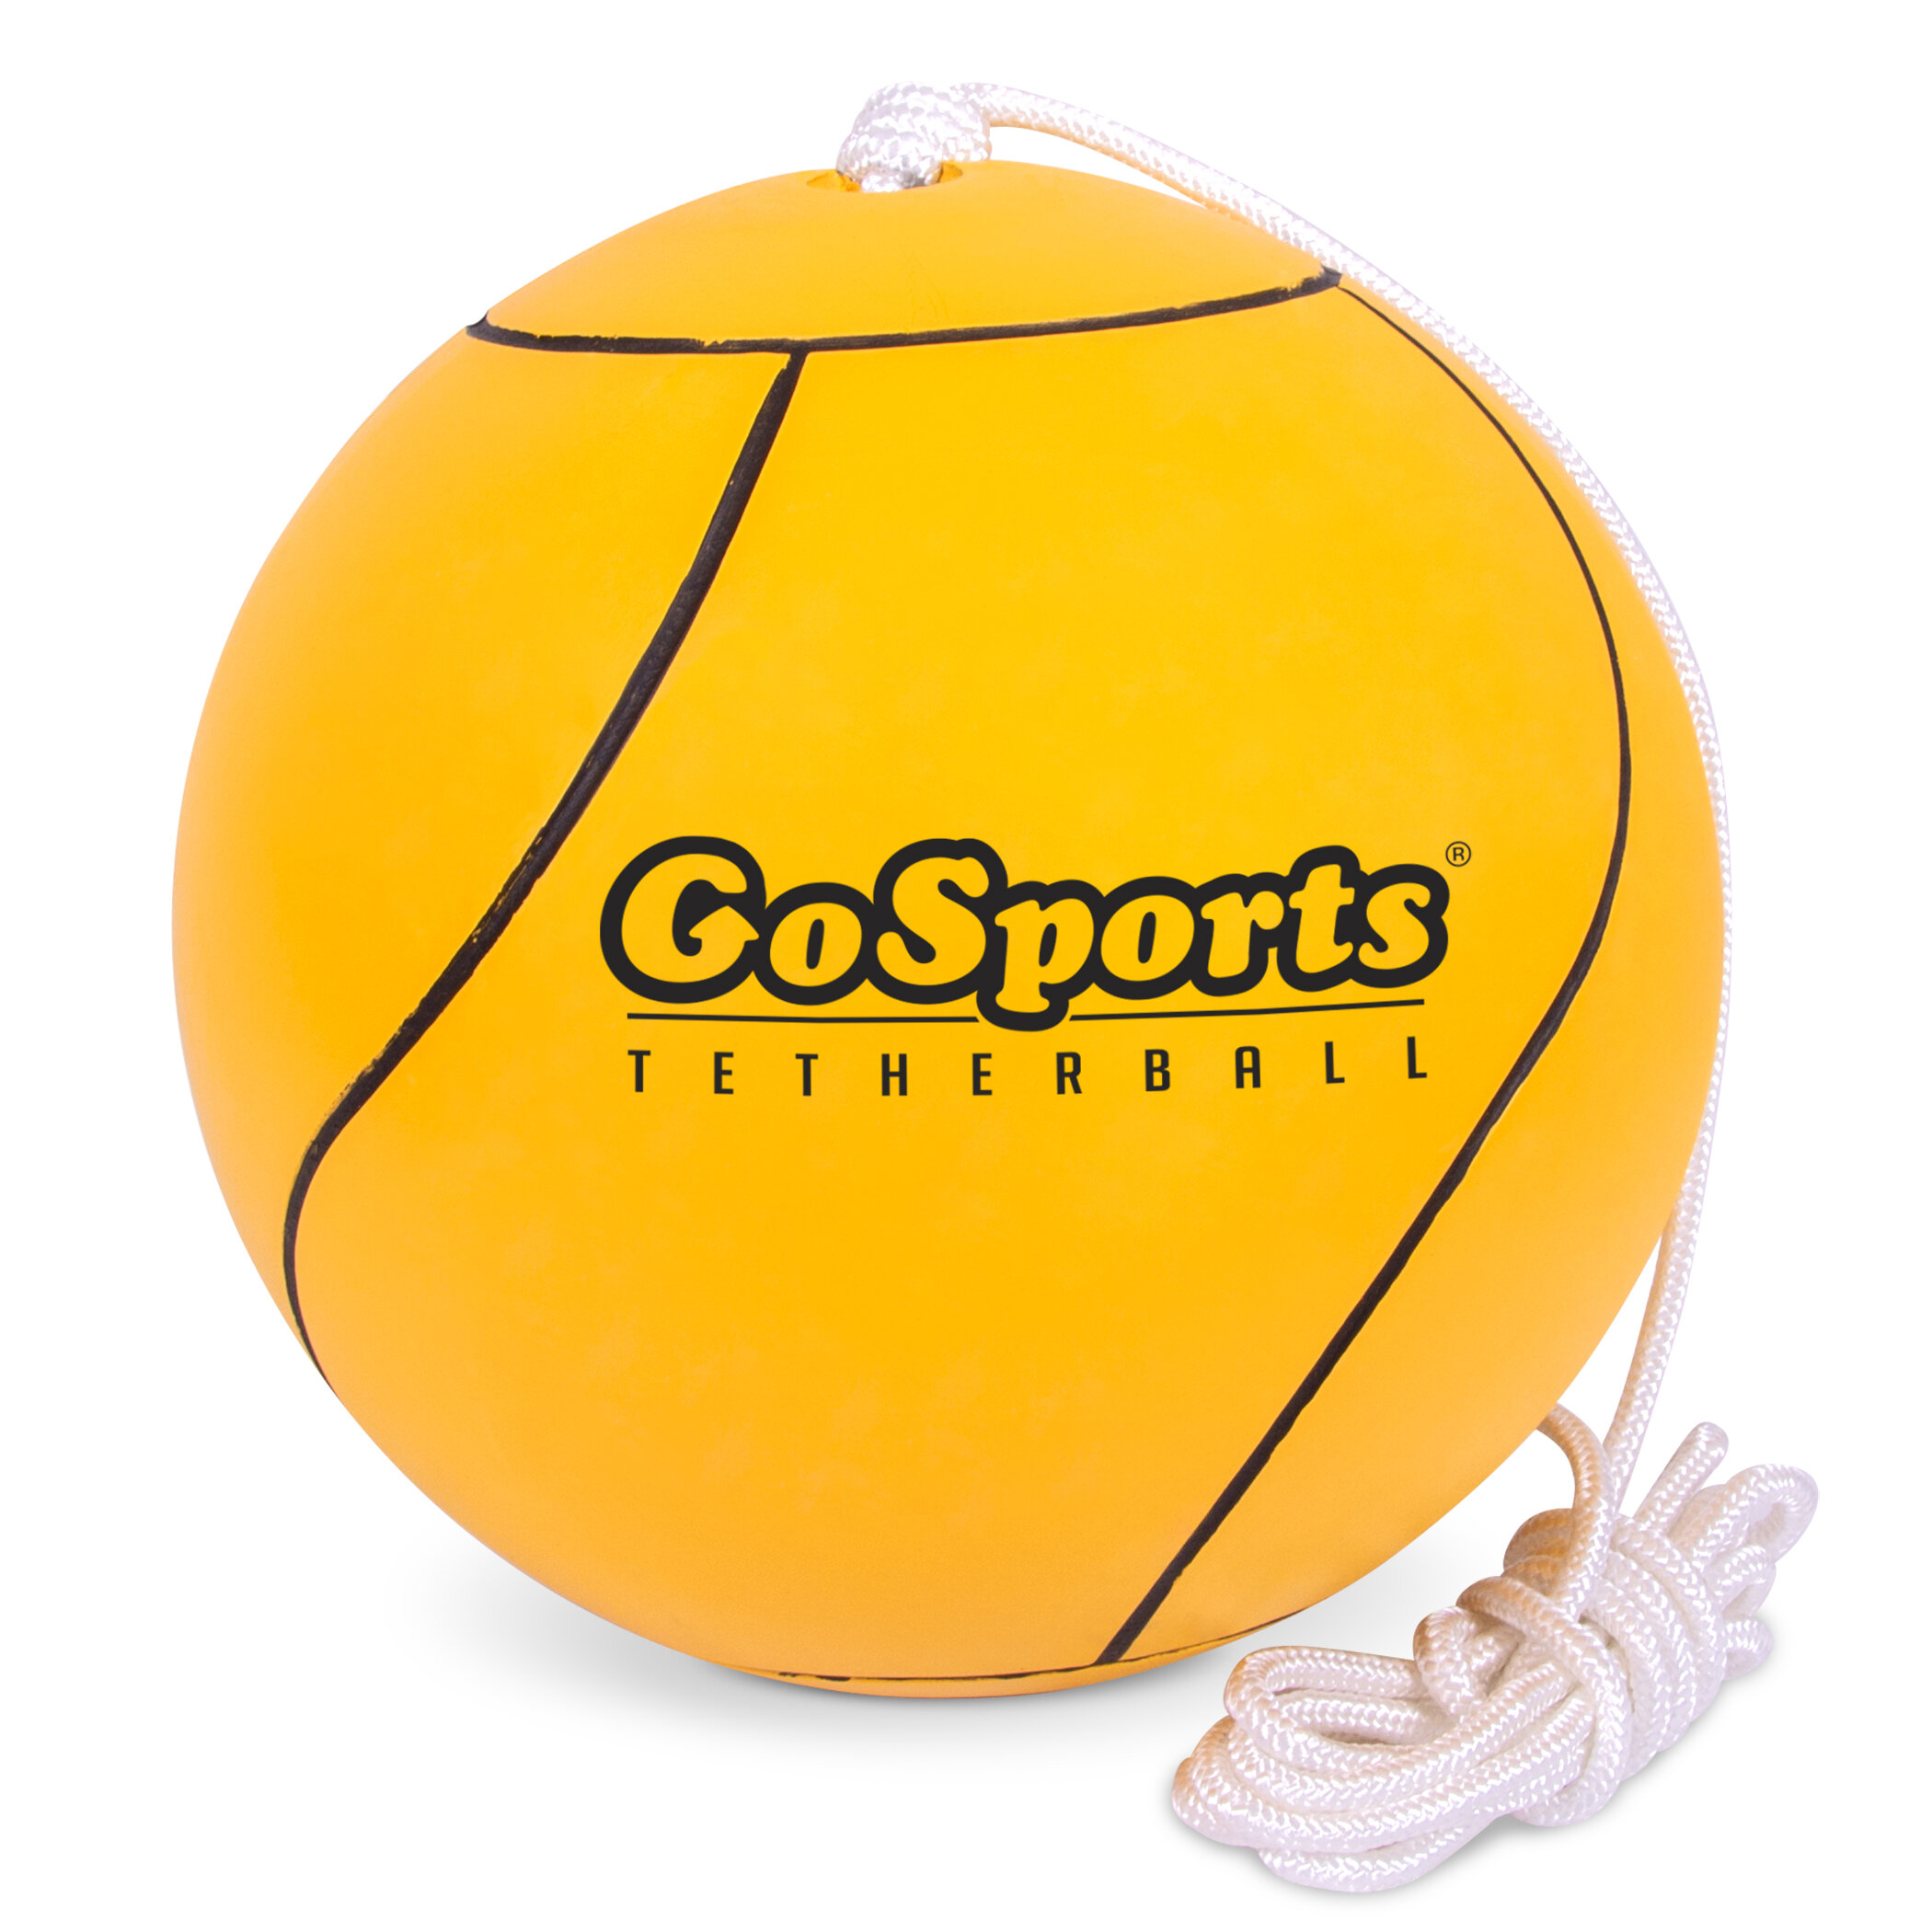 Gosports Tetherball And Rope Set, Full Size Backyard Outdoor Tetherball -  Universally Compatible Tetherball Replacement